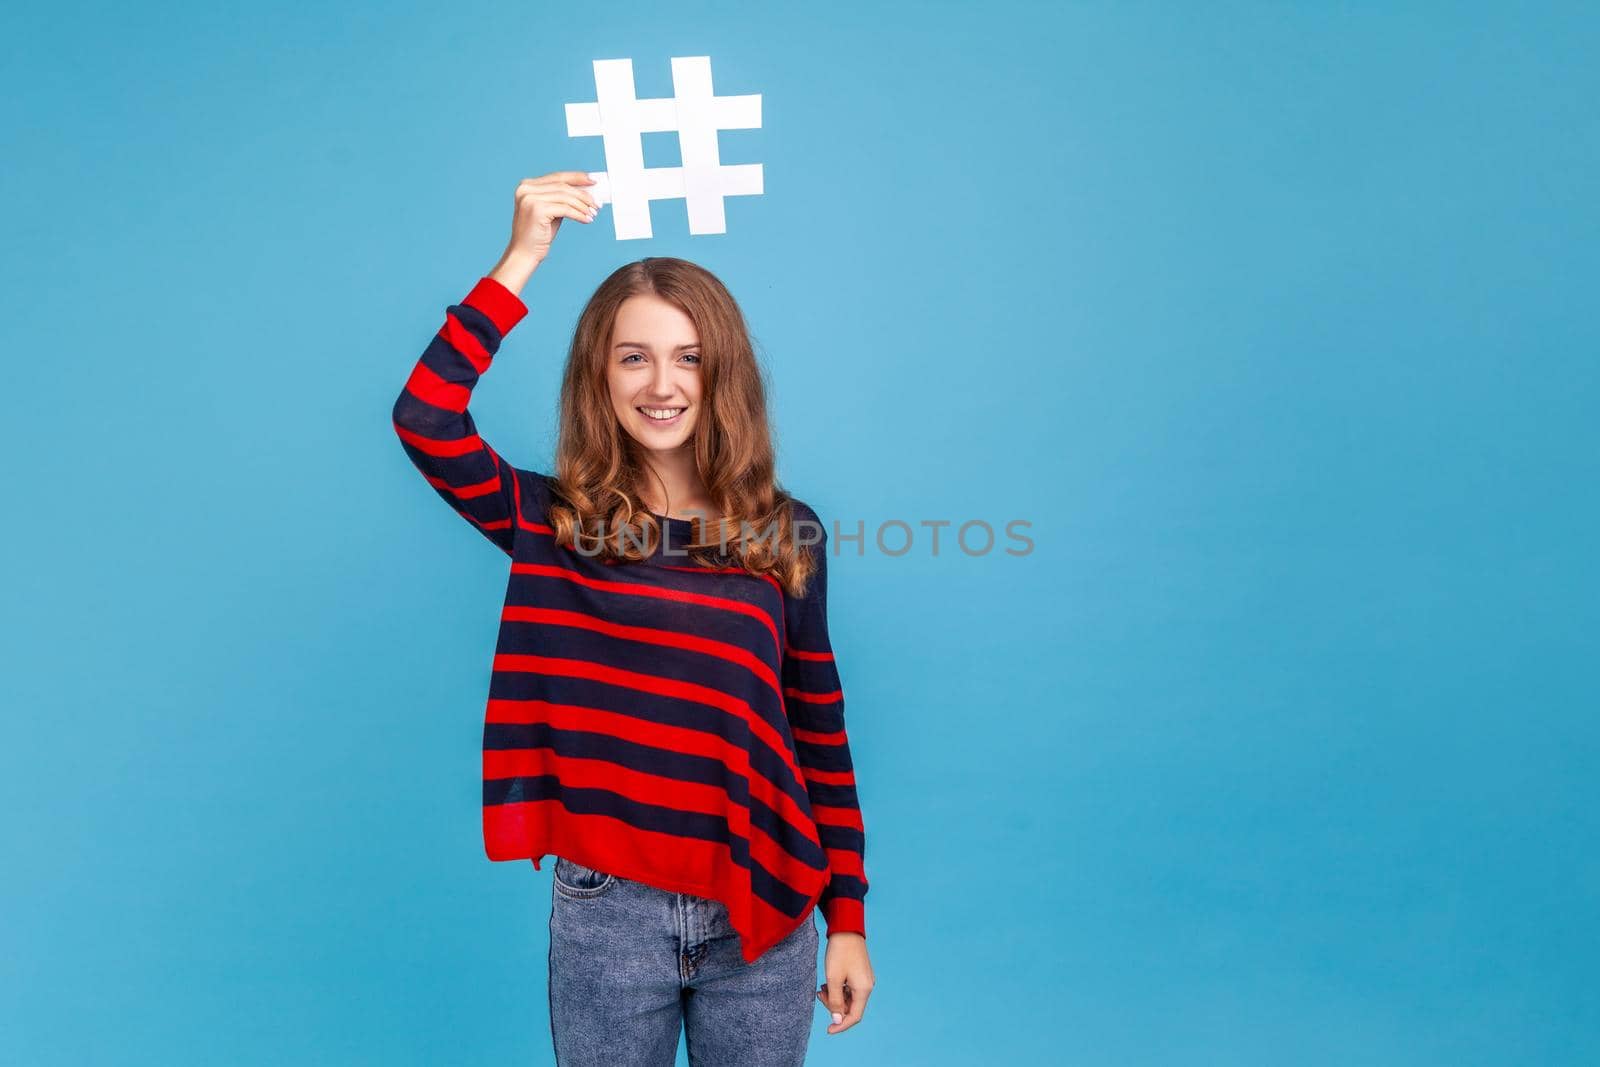 Portrait of woman wearing striped casual style sweater, standing holding hashtag over head, promoting viral topic, trendy idea, smiling to camera. Indoor studio shot isolated on blue background.